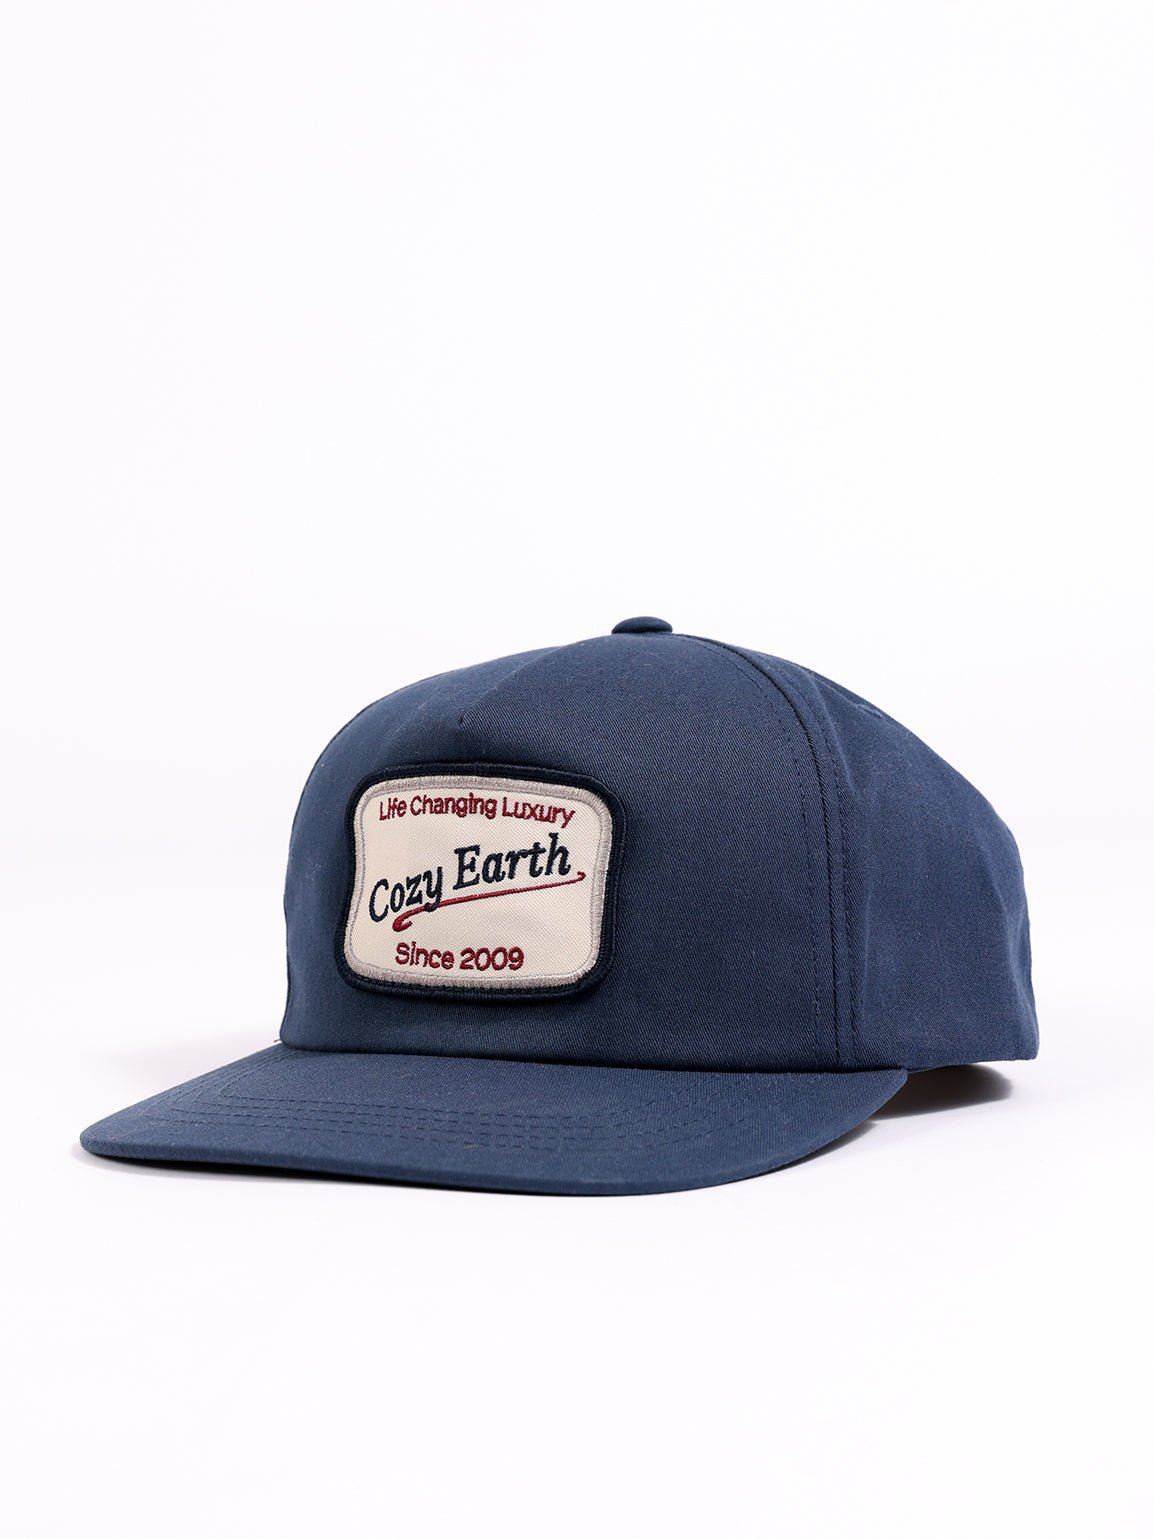 Front and side of navy heritage snapback with white background |Color:Navy